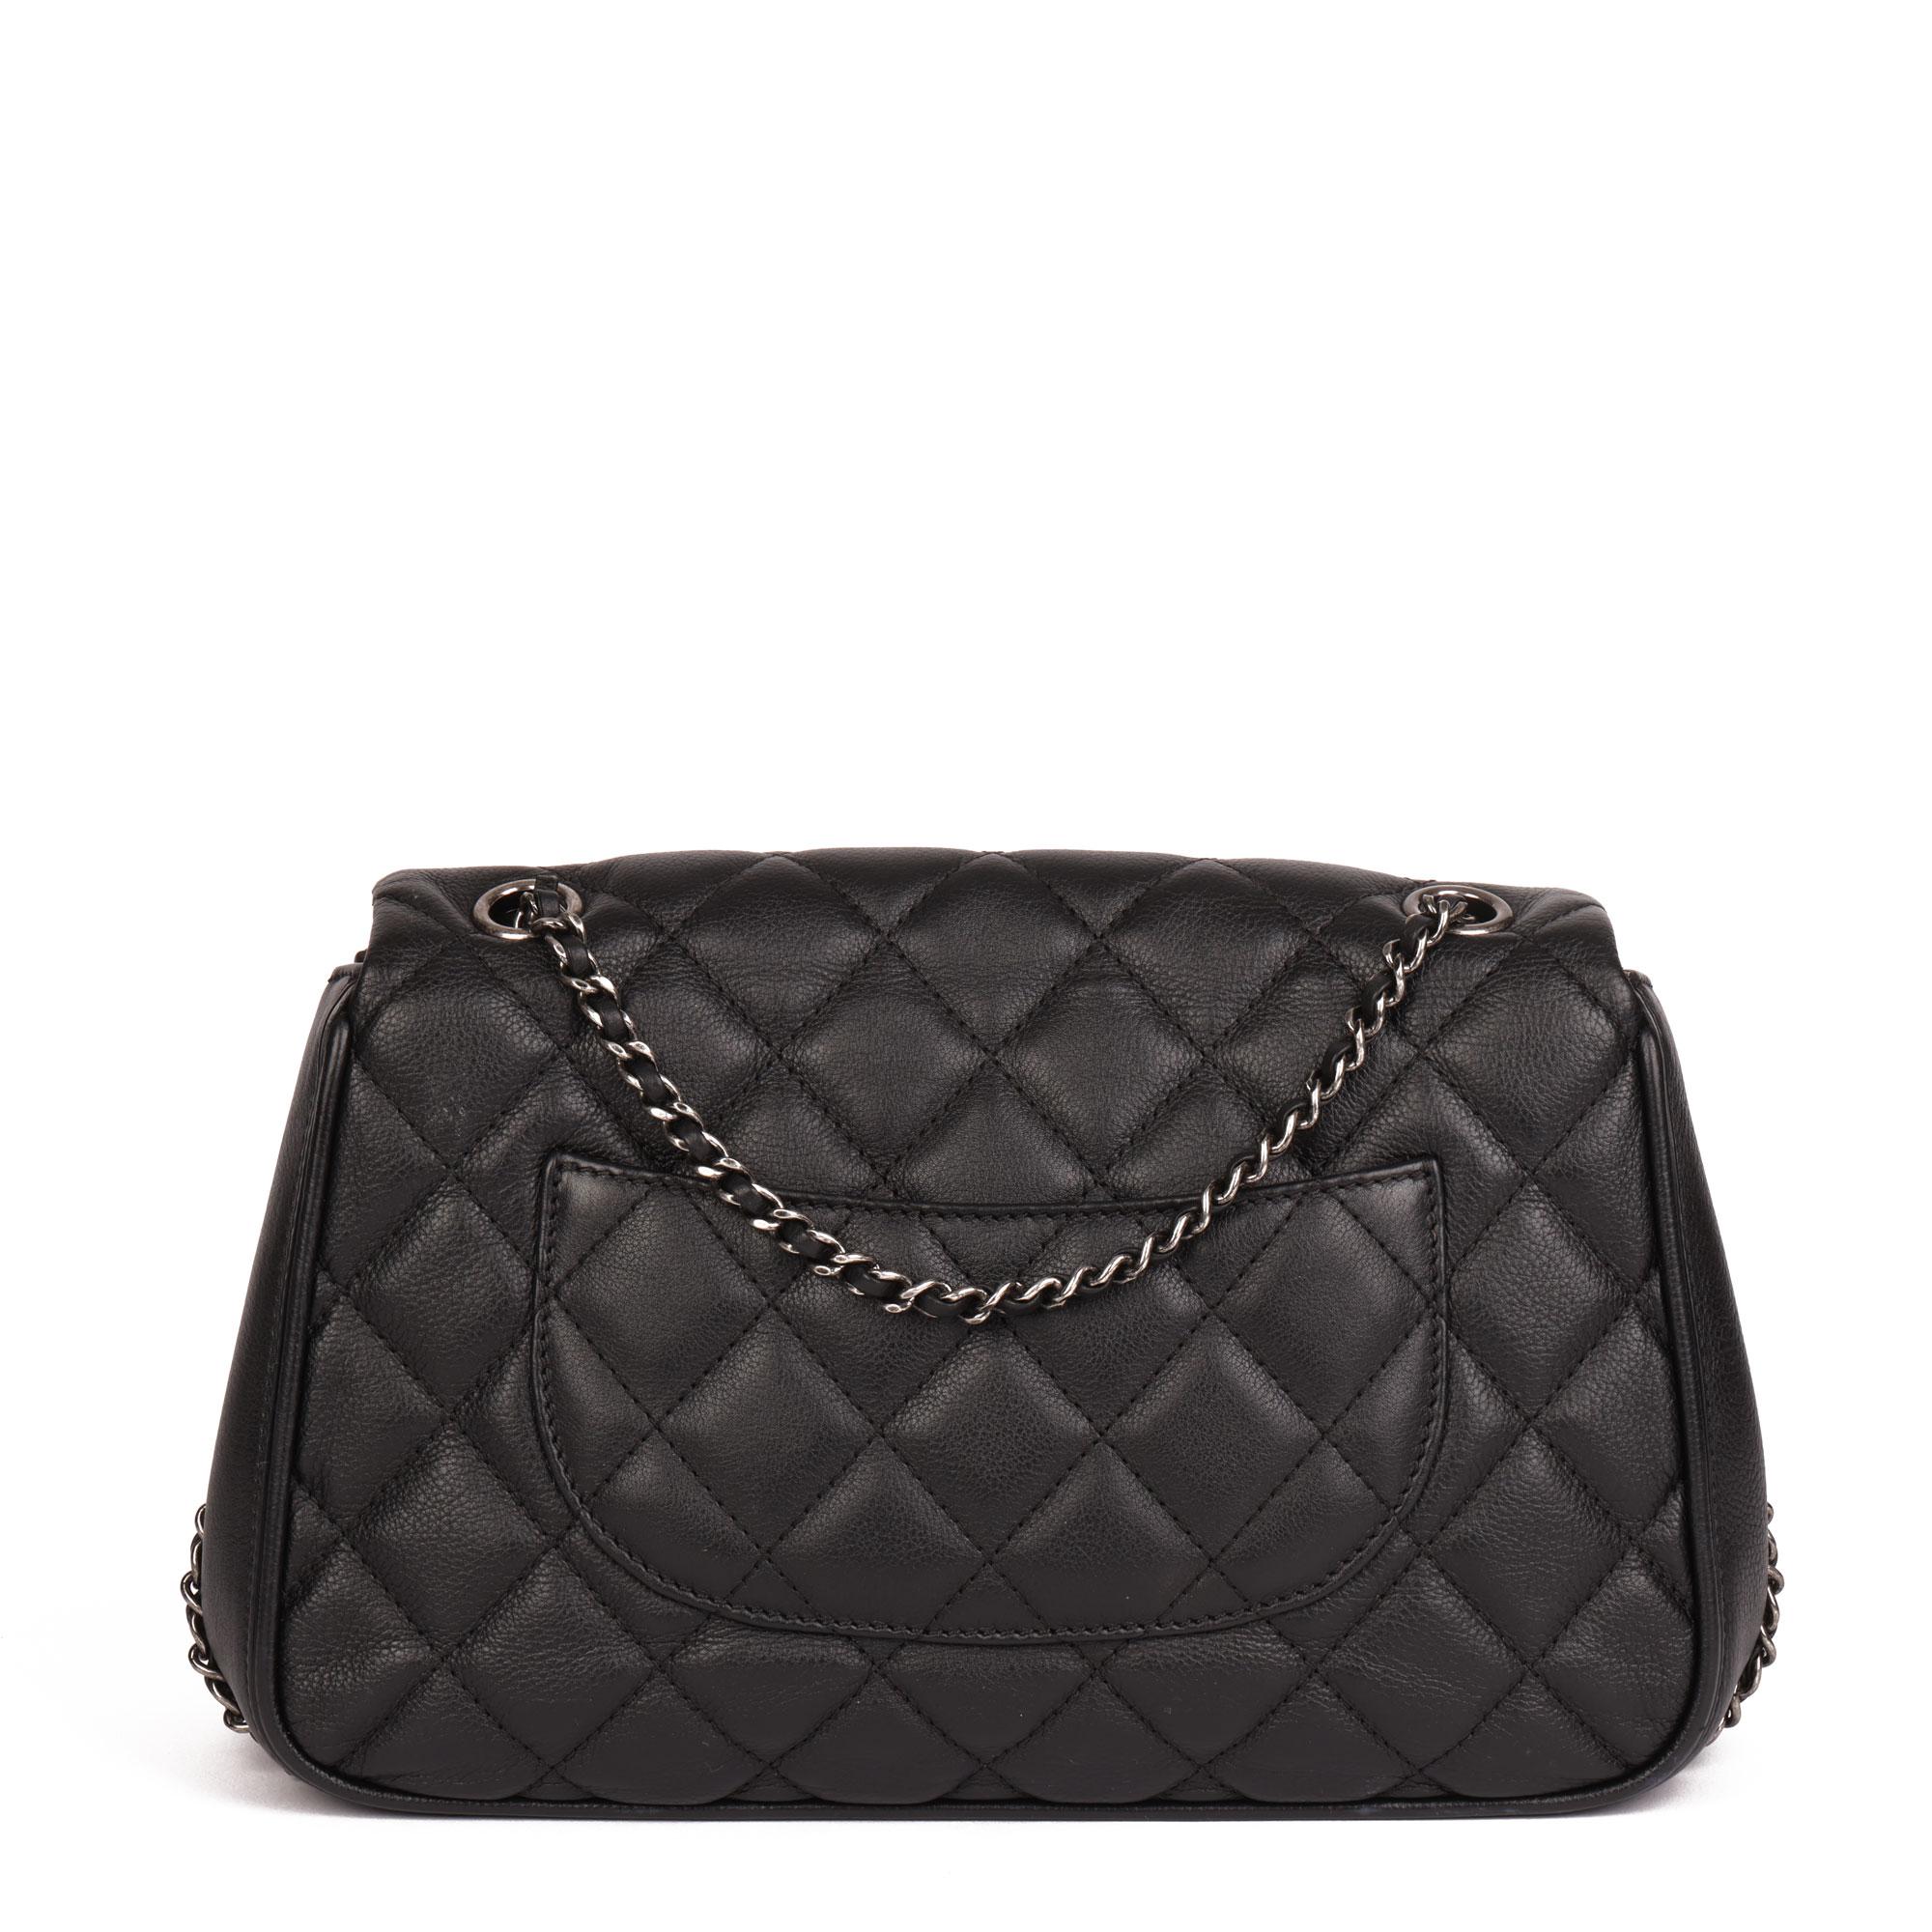 2017 Chanel  Black Quilted Calfskin Leather Medium Frame in Chain Flap Bag 1